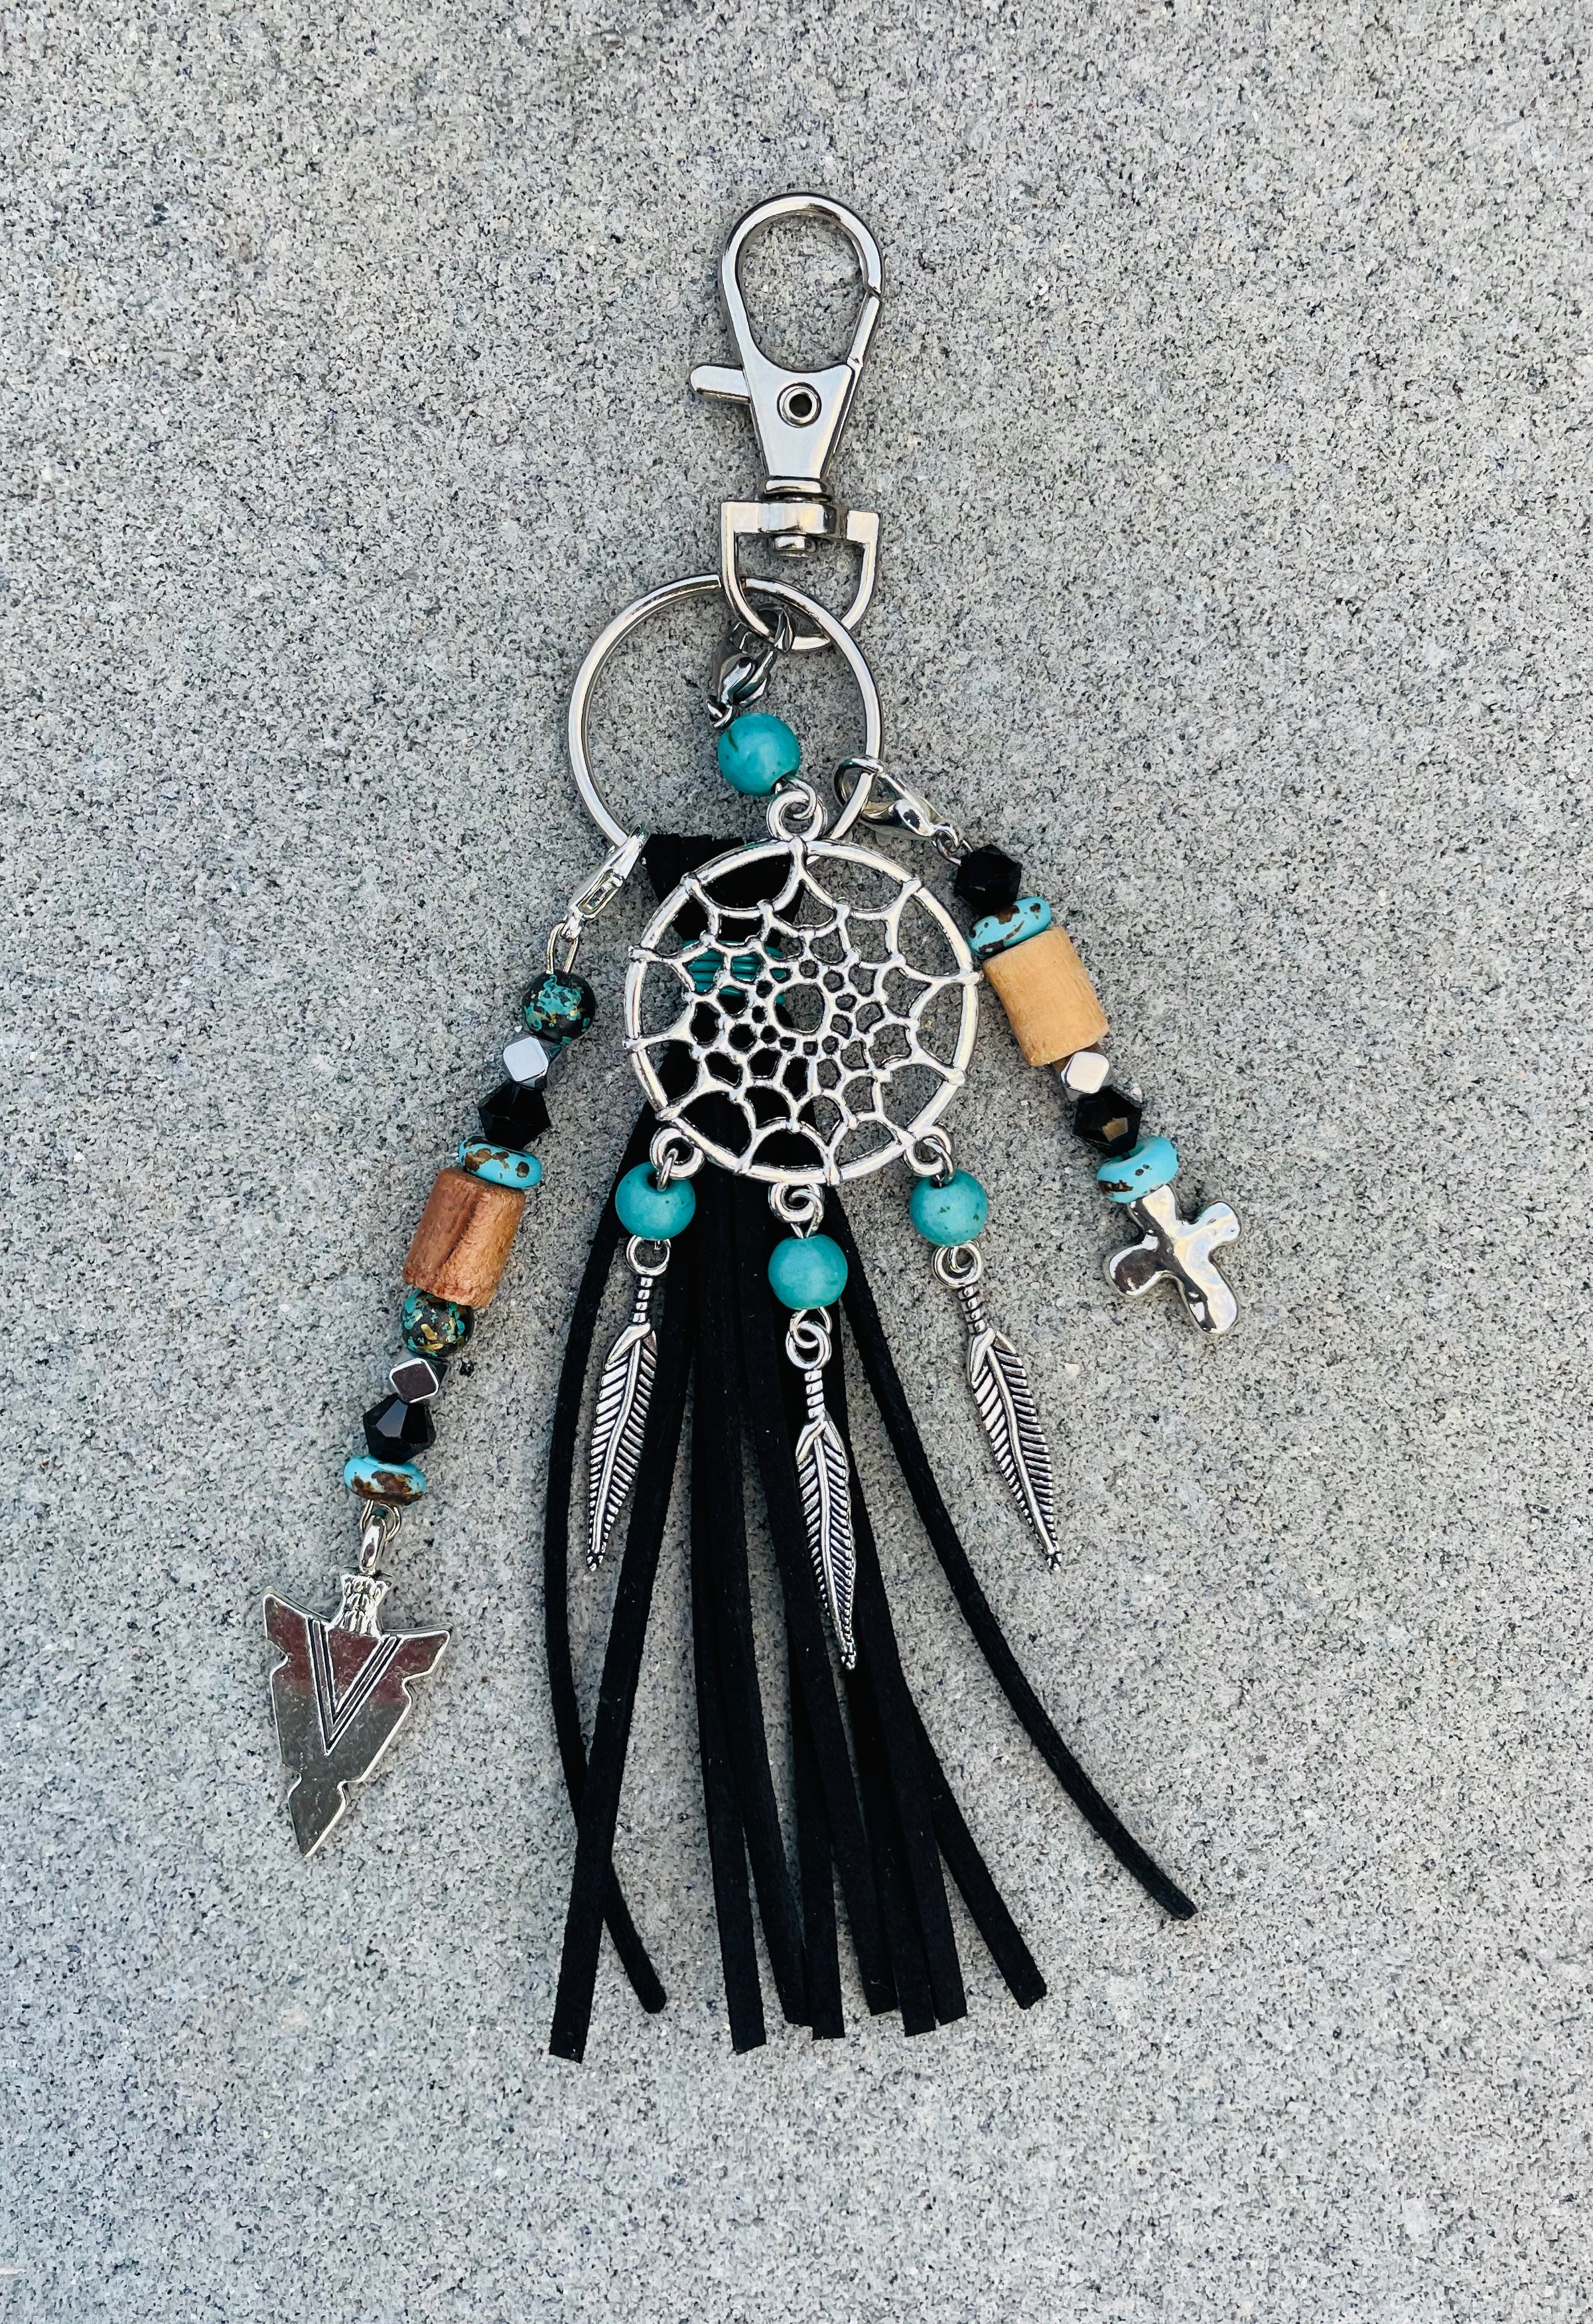 Turquoise Handmade Purse Tassel Great for Purse, Key Ring, Rear View Mirror Western Decor